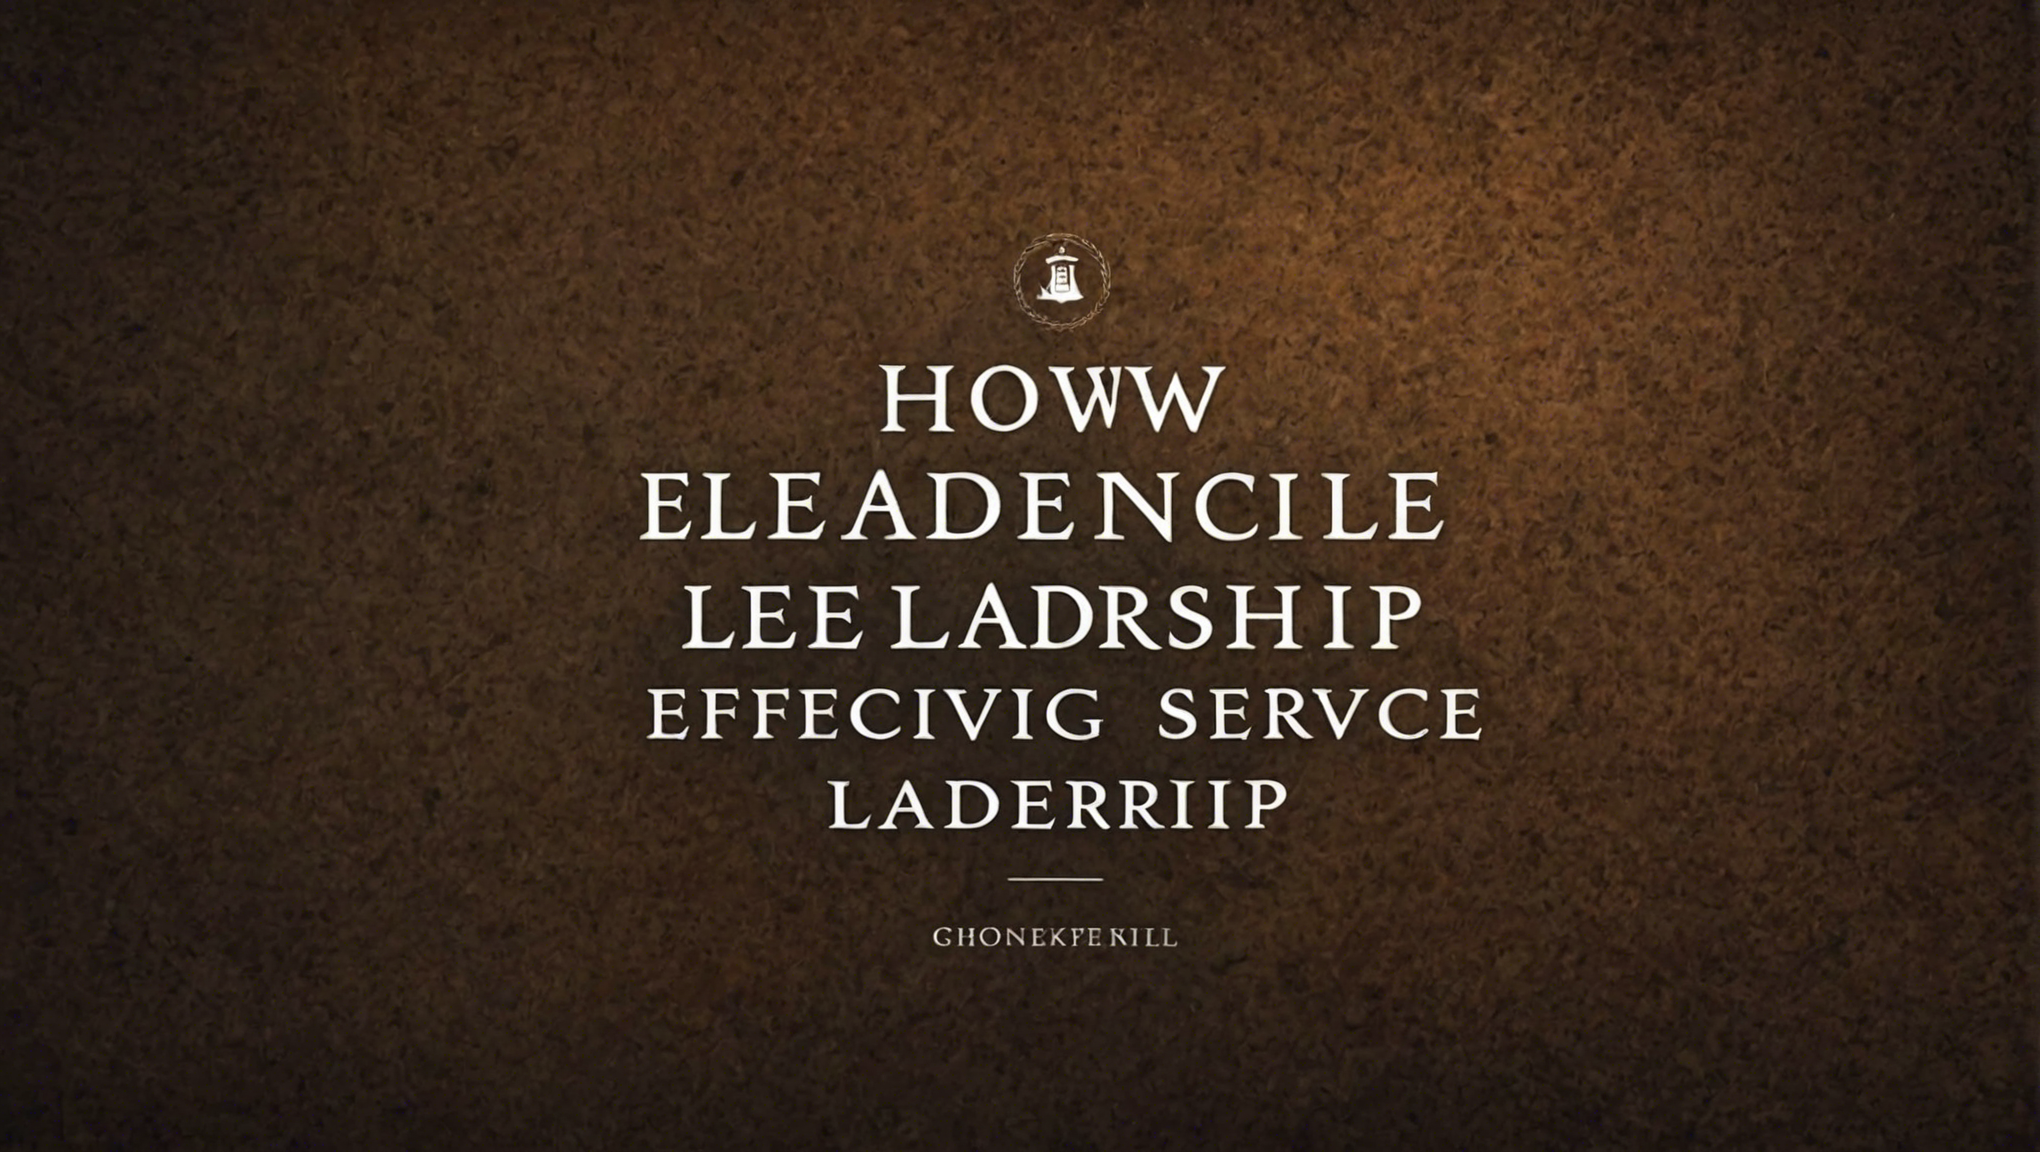 explore how biblical principles can inform and enhance effective leadership and service in this thought-provoking discussion.